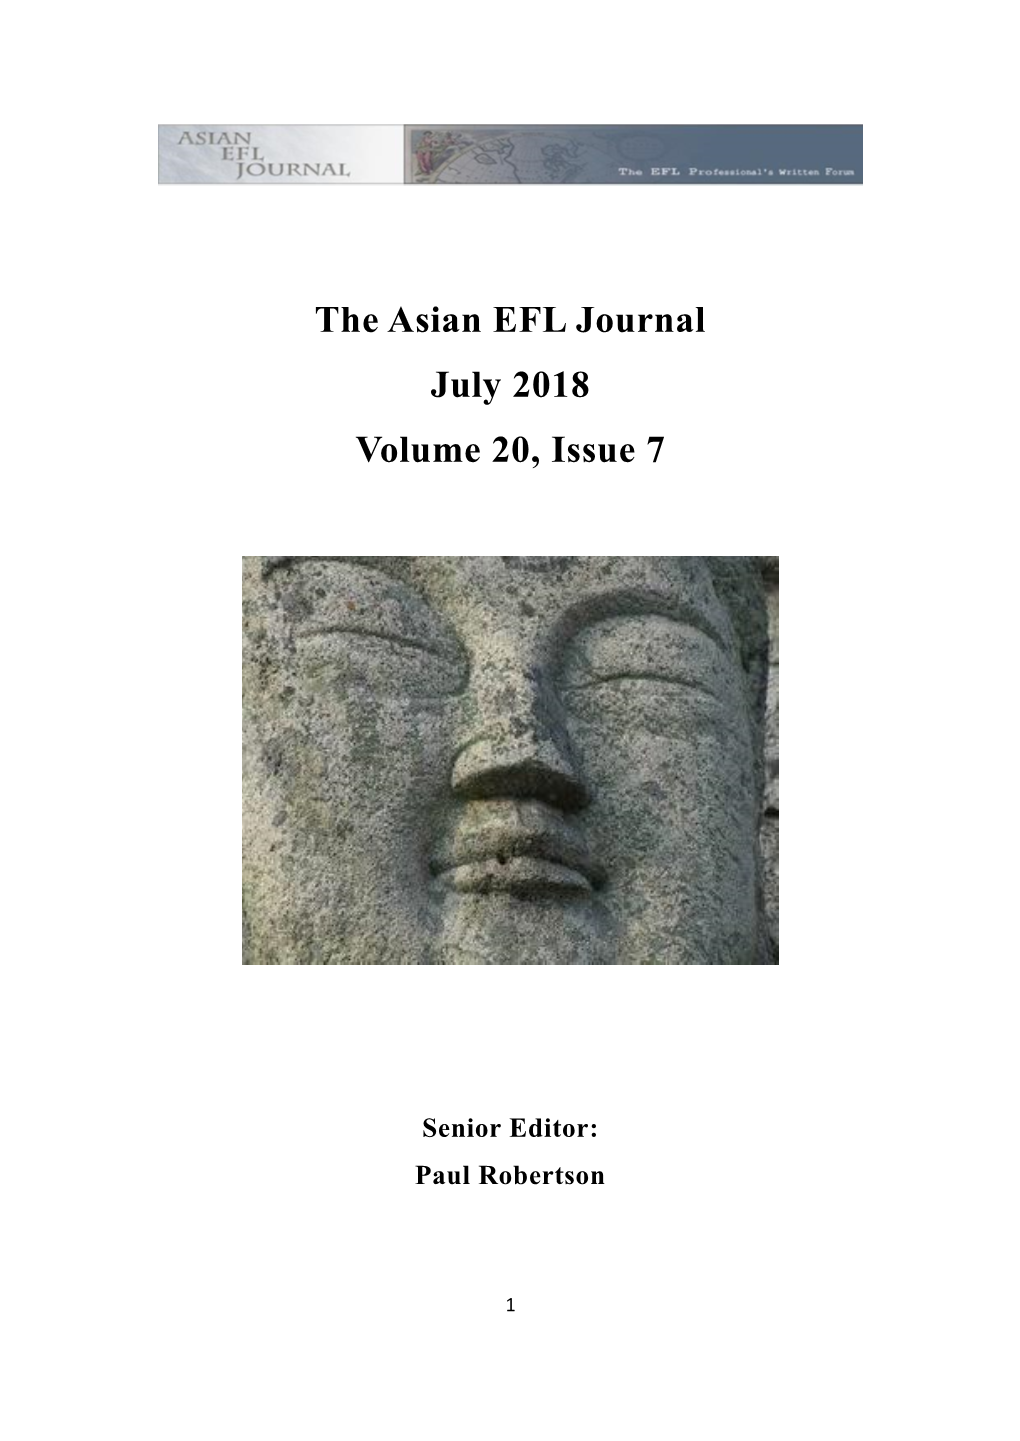 The Asian EFL Journal July 2018 Volume 20, Issue 7